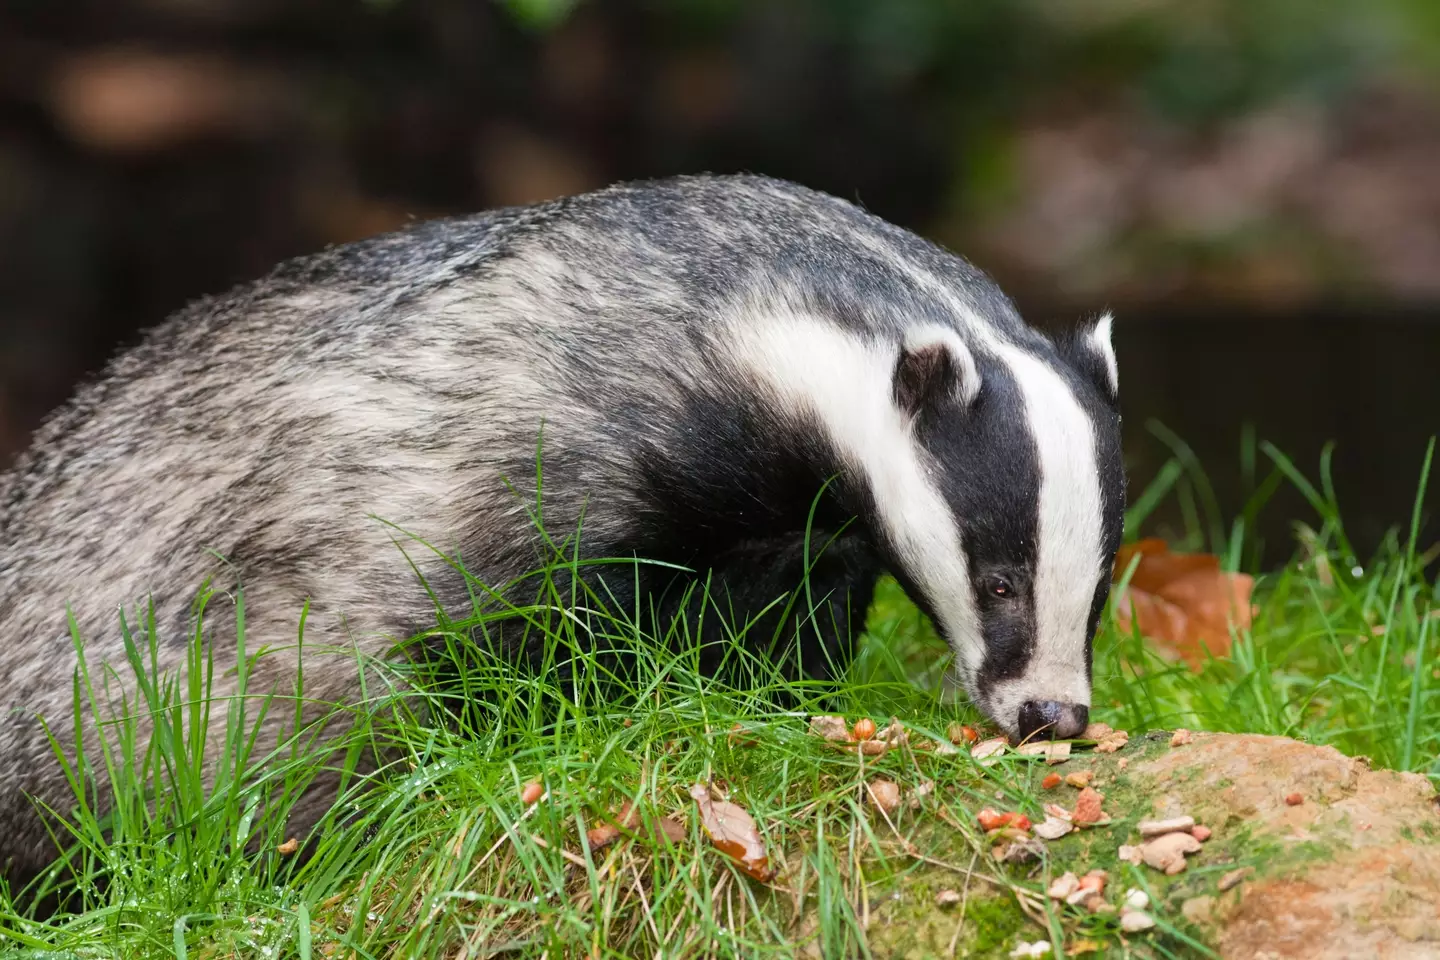 Badgers had been repeatedly digging up human remains from a nearby church and leaving them in Ann’s garden.